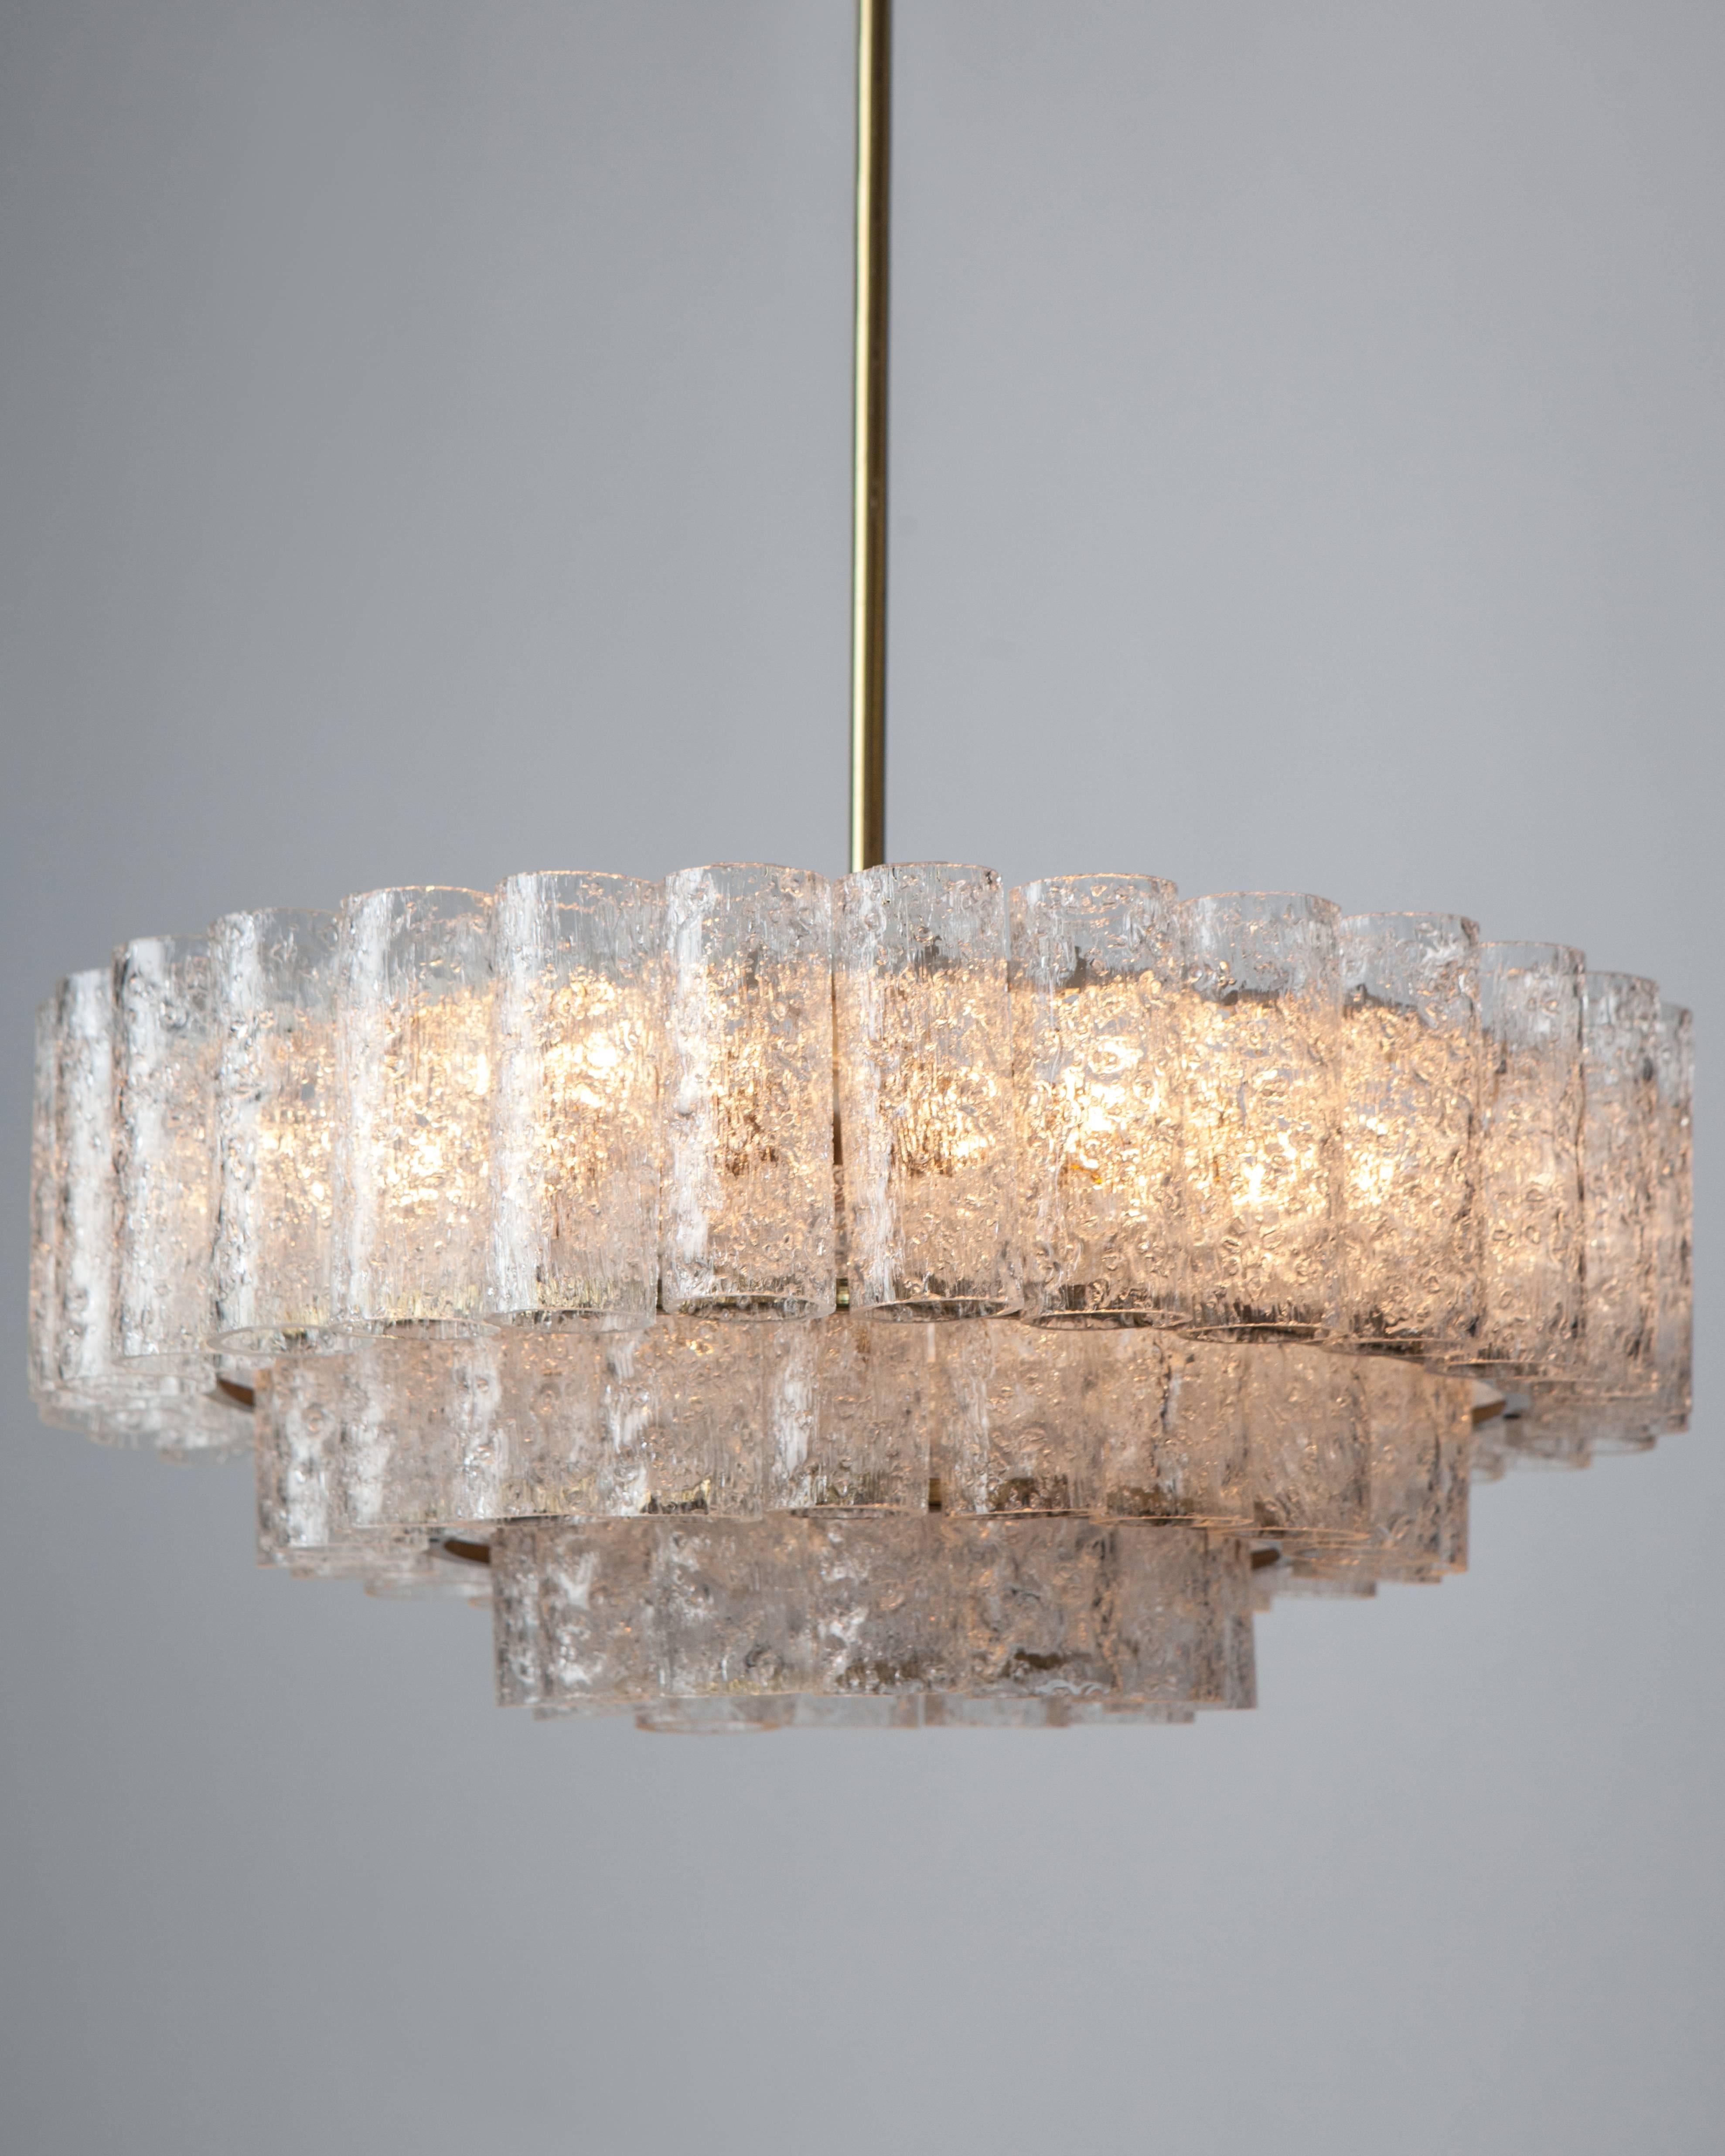 AHL4005.
A vintage chandelier having an old bright brass finished frame with textured clear glass shades in three descending rings. Signed by the German maker Doria. Due to the antique nature of this fixture, there may be some nicks or